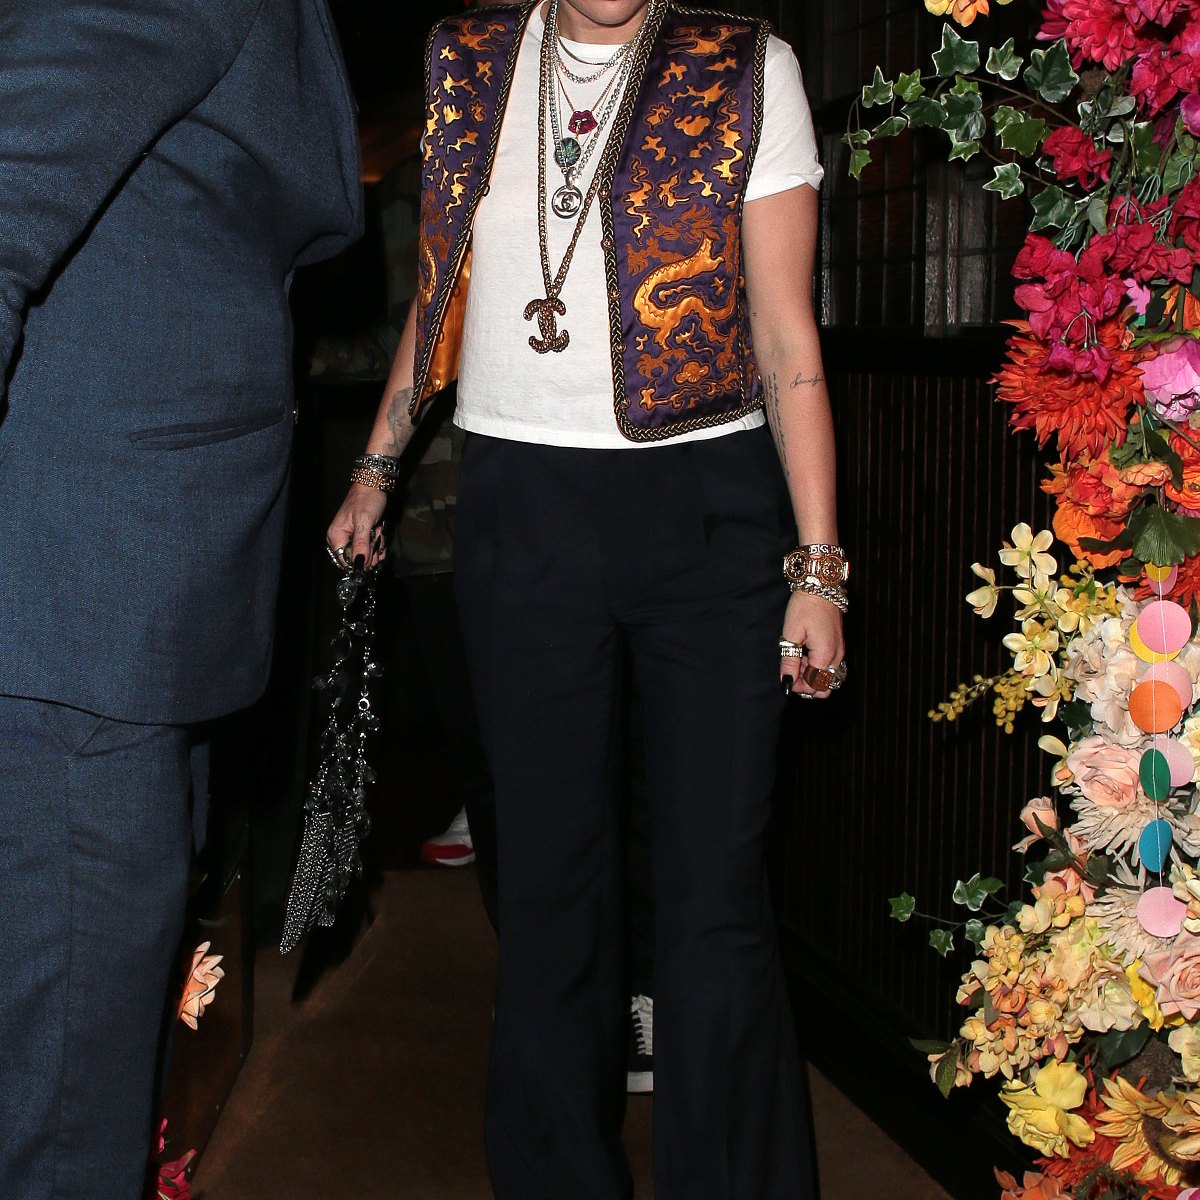 Miley Cyrus Louis Vuitton Silver Pleated Top & Tuxedo Pants Look for Less -  The Budget Babe